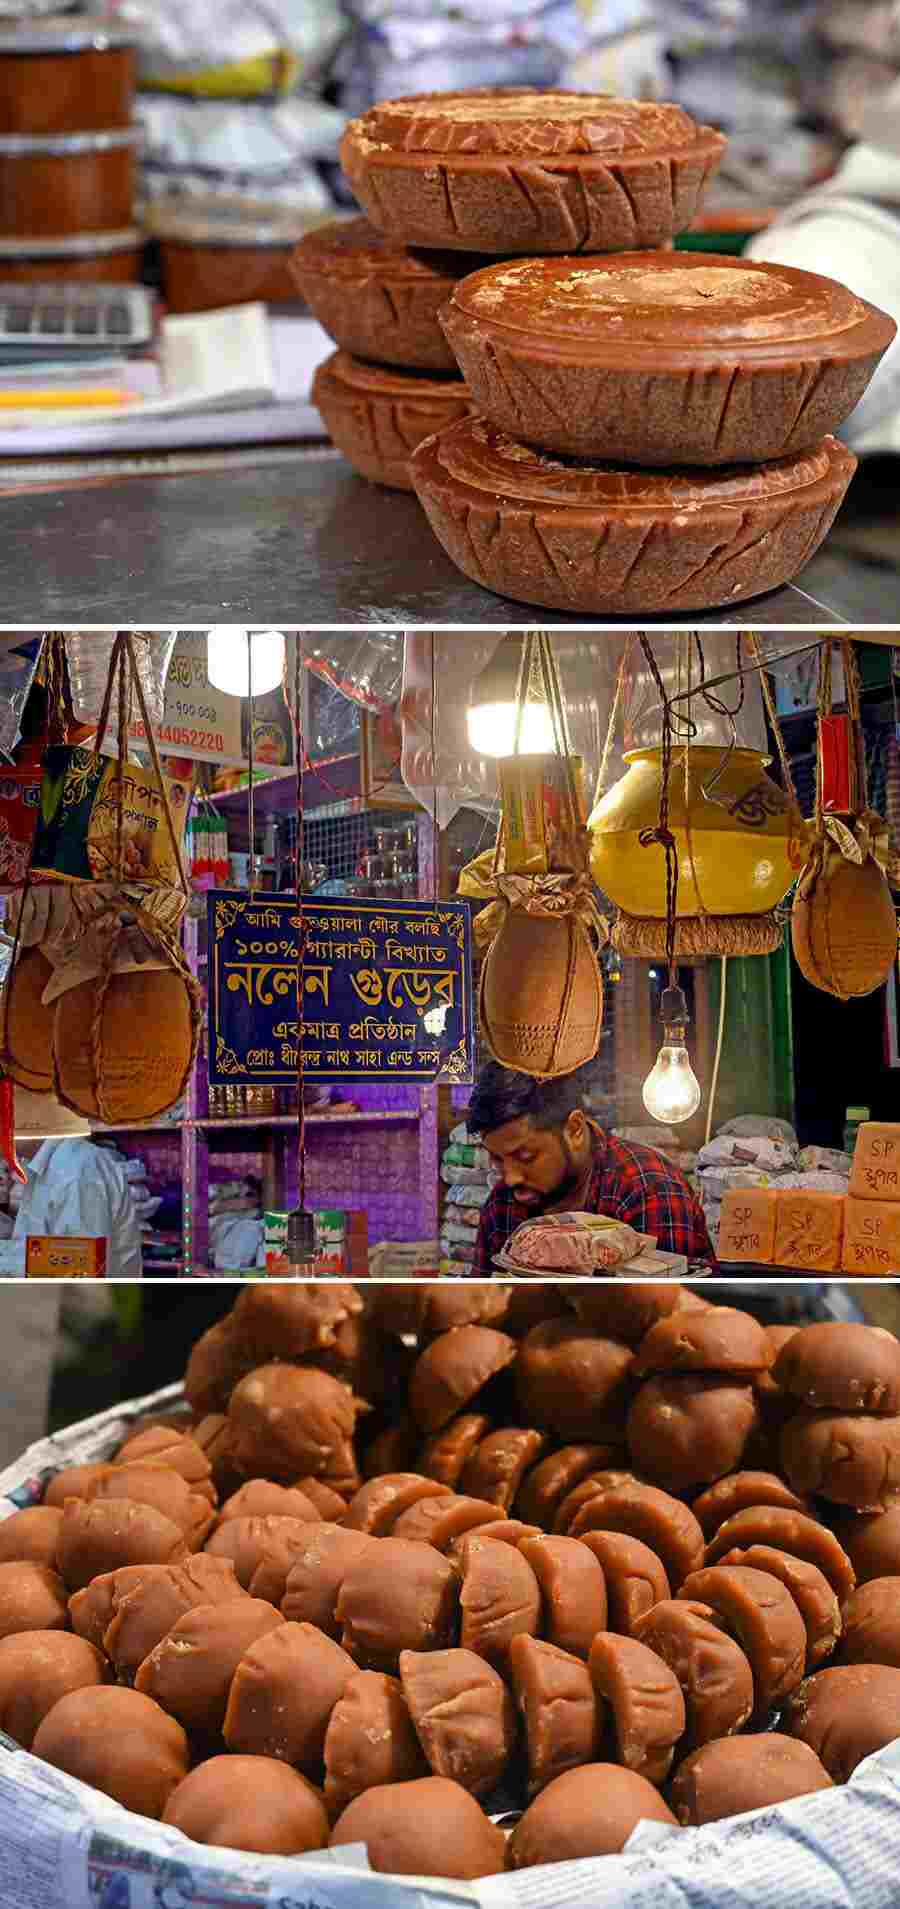 Kolkata winters are synonymous with ‘gur’ (jaggery). ‘Khejurer gur’ is the most sought after and comes in various shapes, sizes and consistencies from ‘patali’ (flat and hard jaggery cakes of varying sizes) to ‘jhola’ (liquid) or ‘nolen gur’ or ‘muchi’ (small conical shaped jaggery). Even Sukumar Ray declared his love for this liquid gold — “… kintu shobar chaite bhalo pauriuti aar jhola gur.”